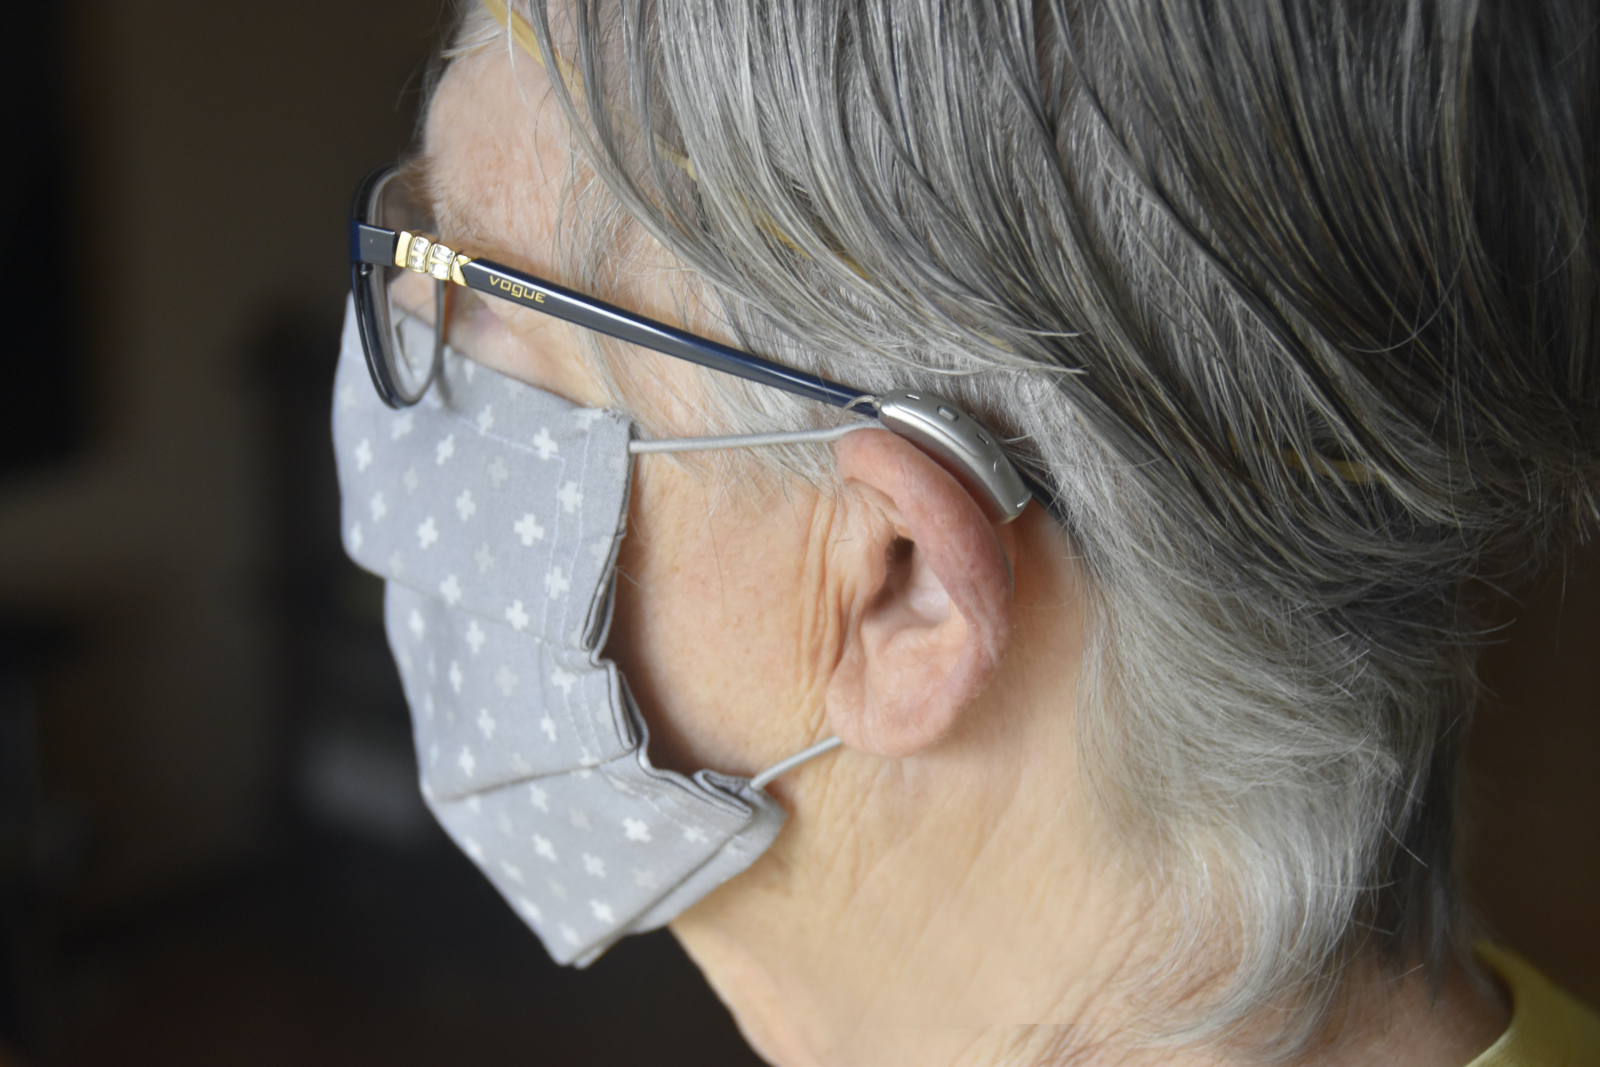 Woman wearing a face mask, hearing aids and eyeglasses.